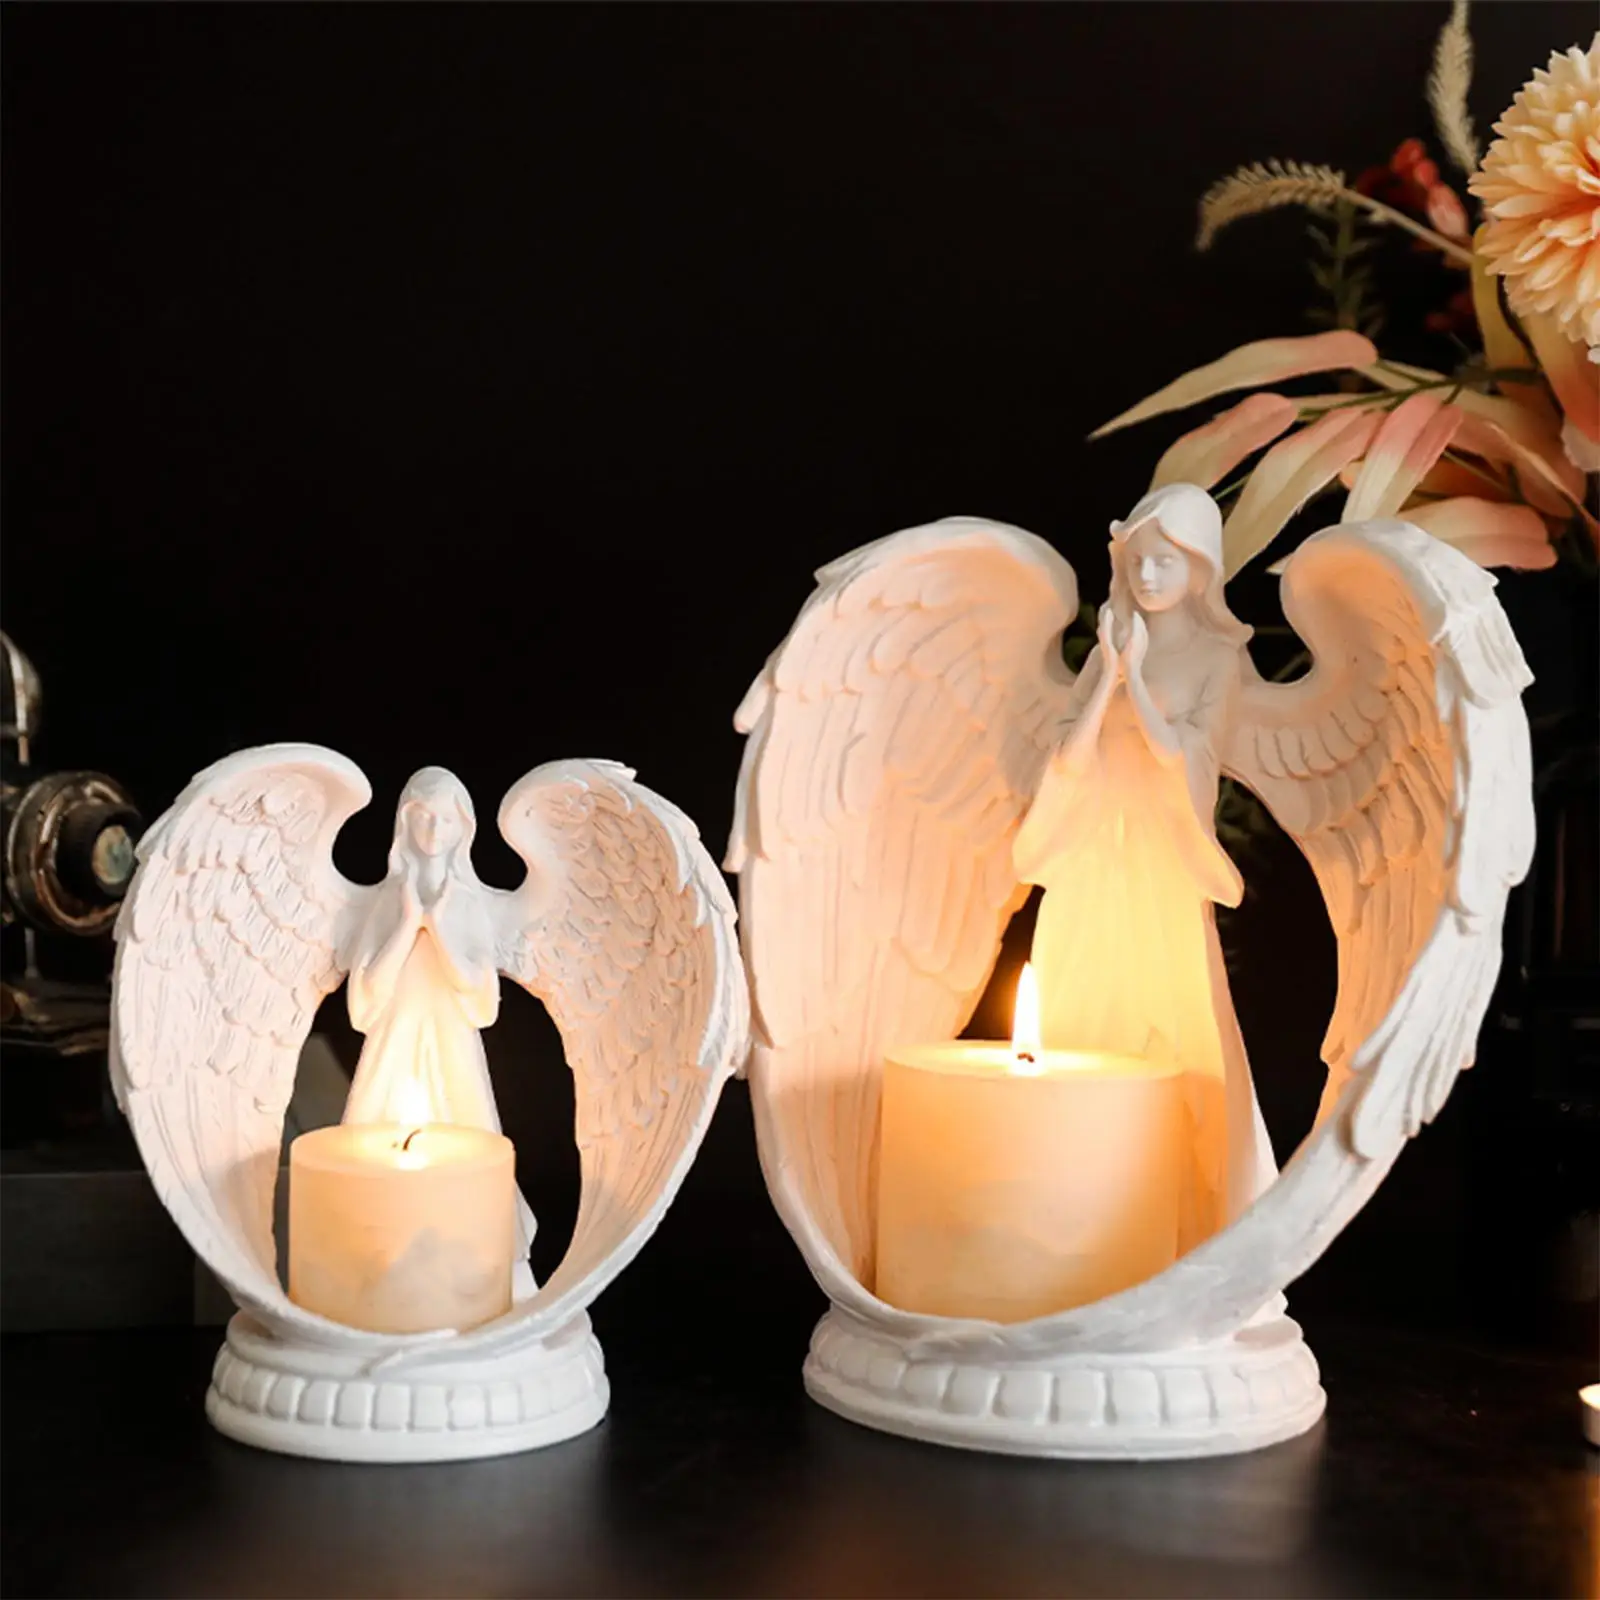 Candle Holder Votive Candle Holders Angel Figurine Table Centerpiece for Anniversary Birthday Party Decoration